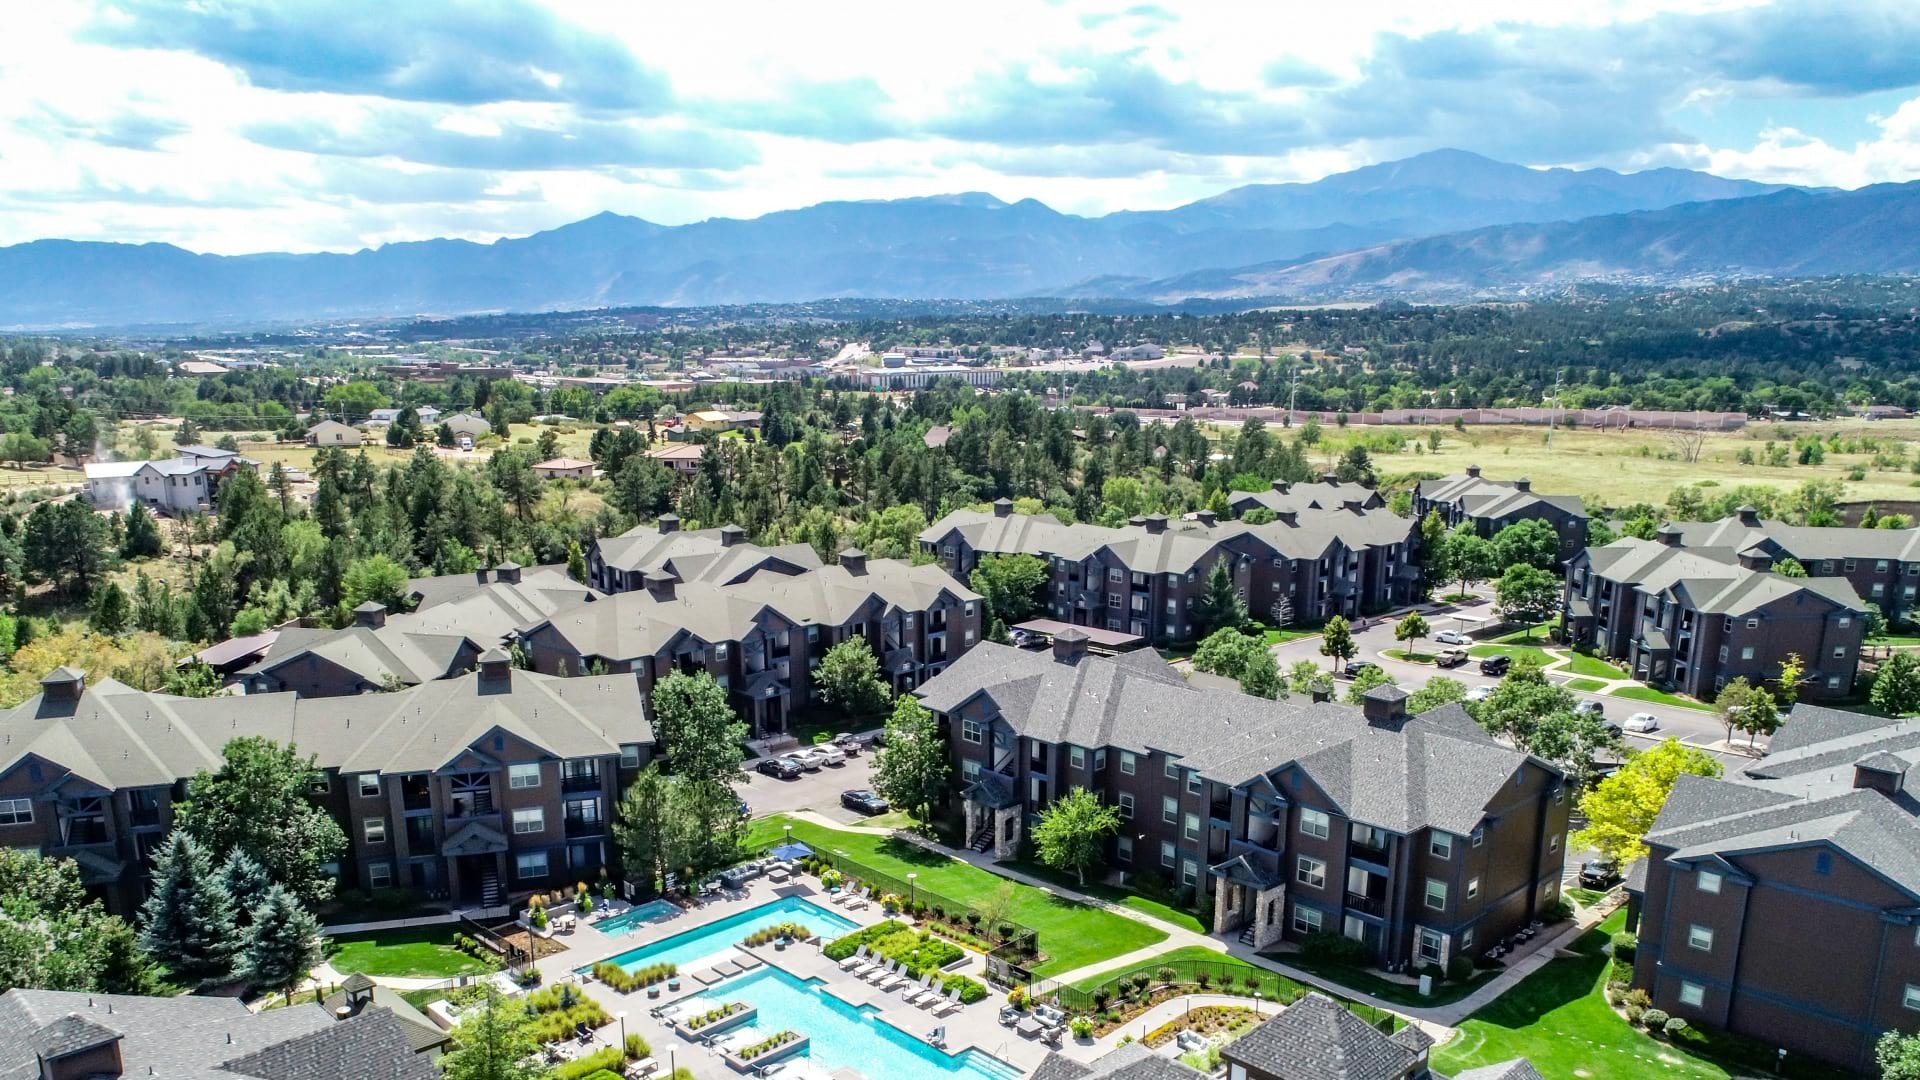 Our Cortland Grand River apartments with views of the mountains